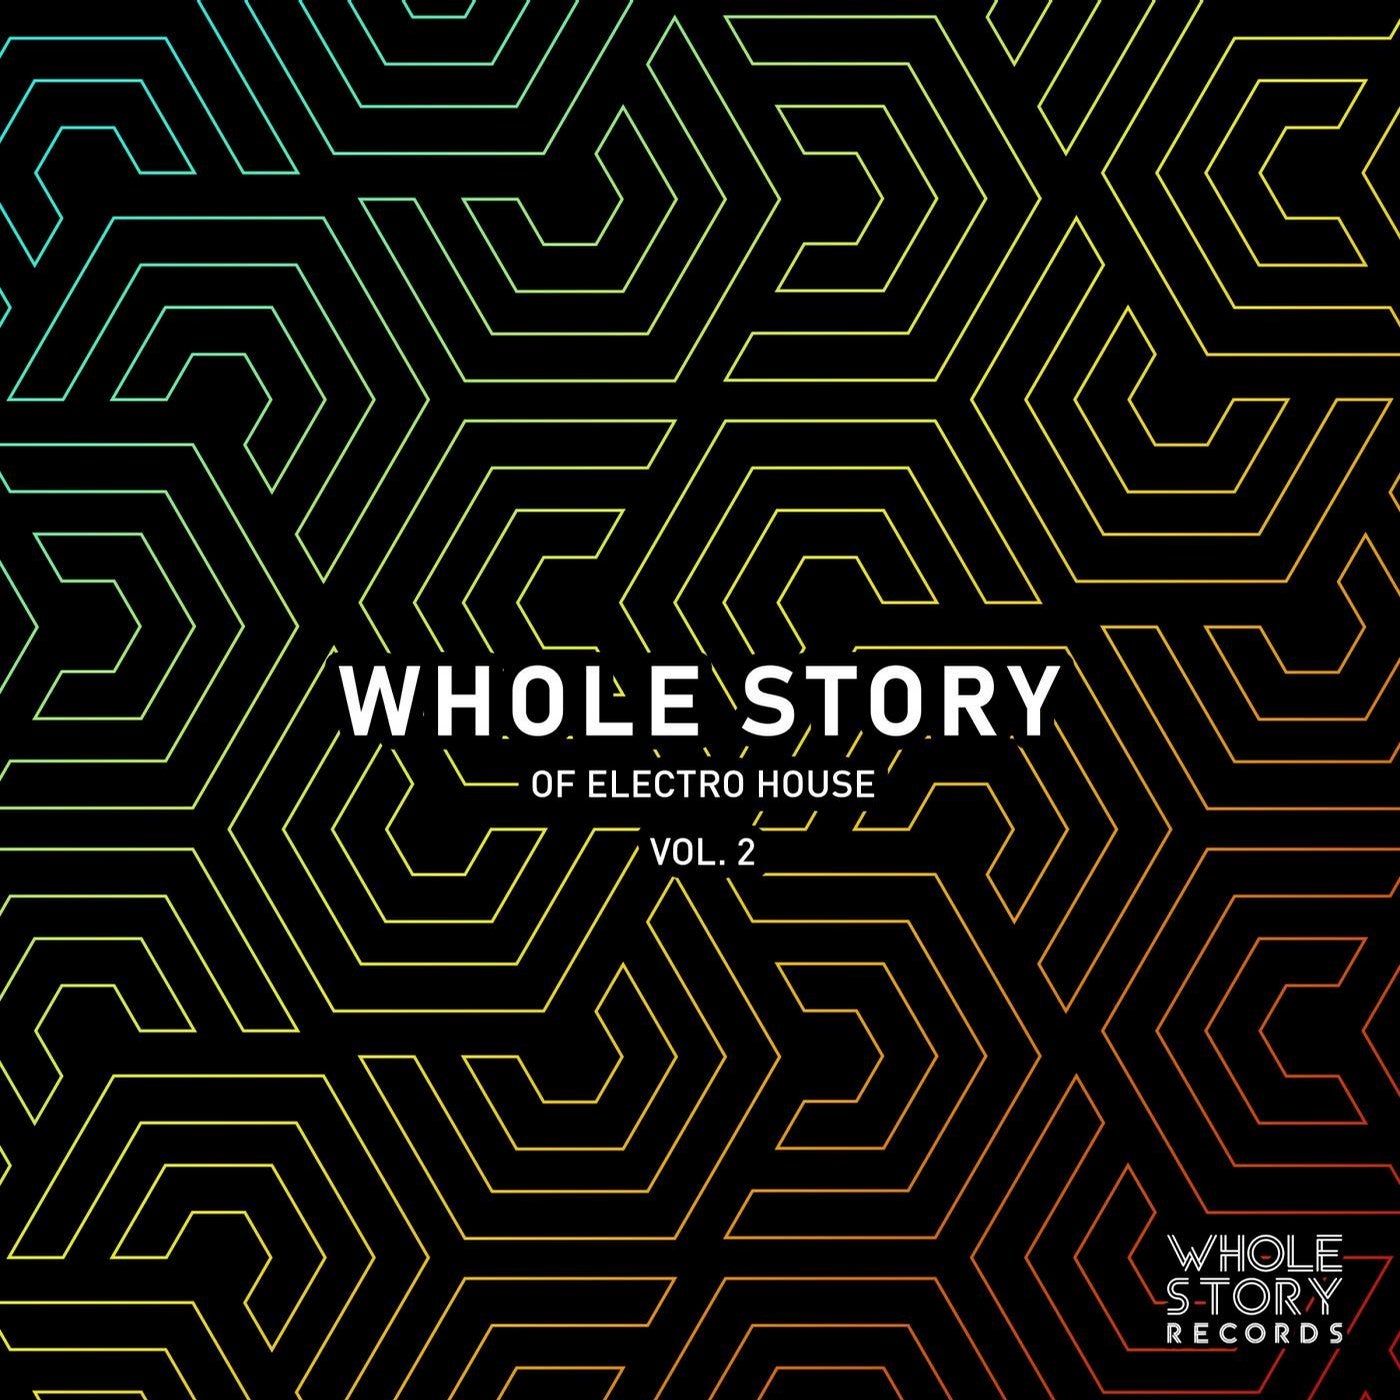 Whole Story Of Electro House Vol. 2